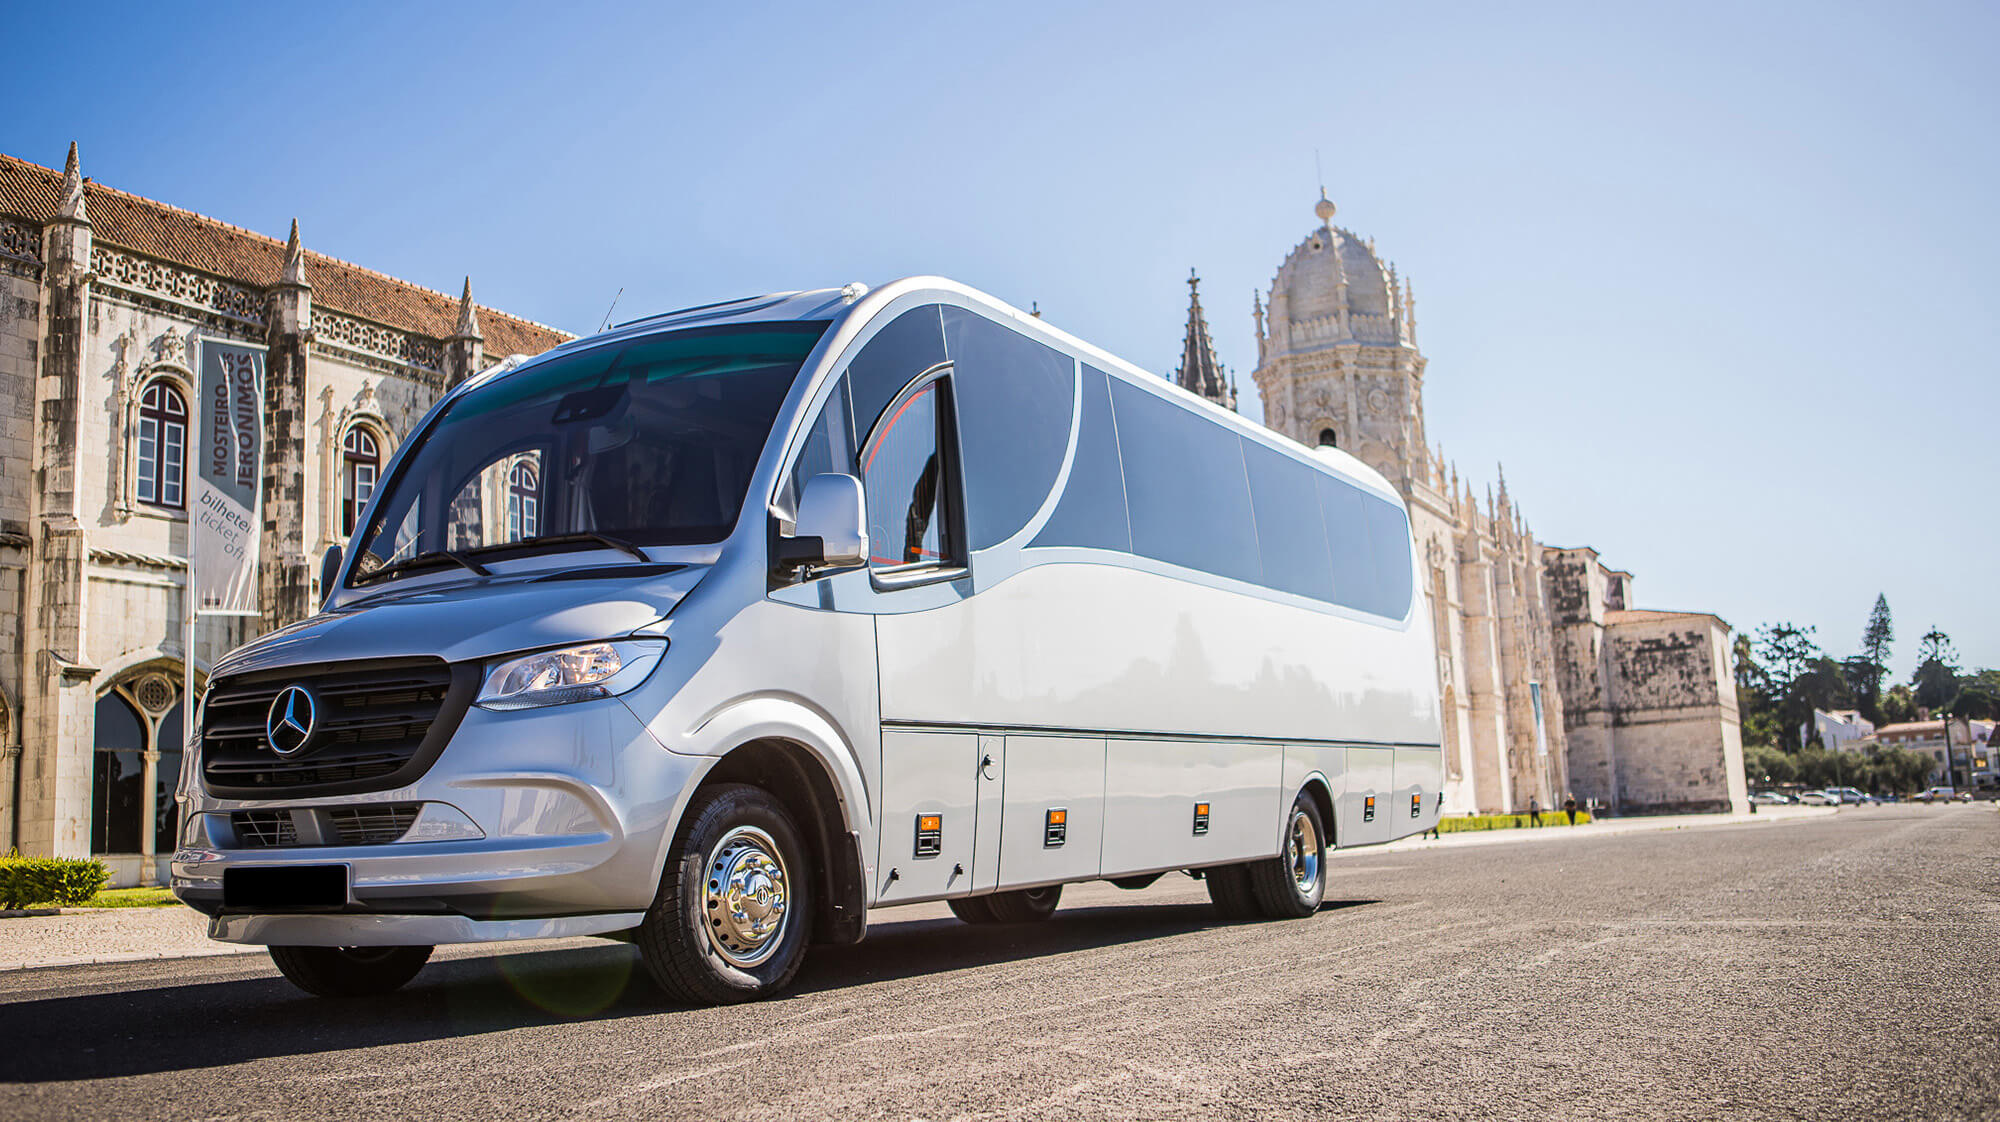 Hire a 30 seater Midibus (Mercedes Tourism 2020) from SPECIALIMO TRAVEL GROUP in Almargem do Bispo, Sintra 